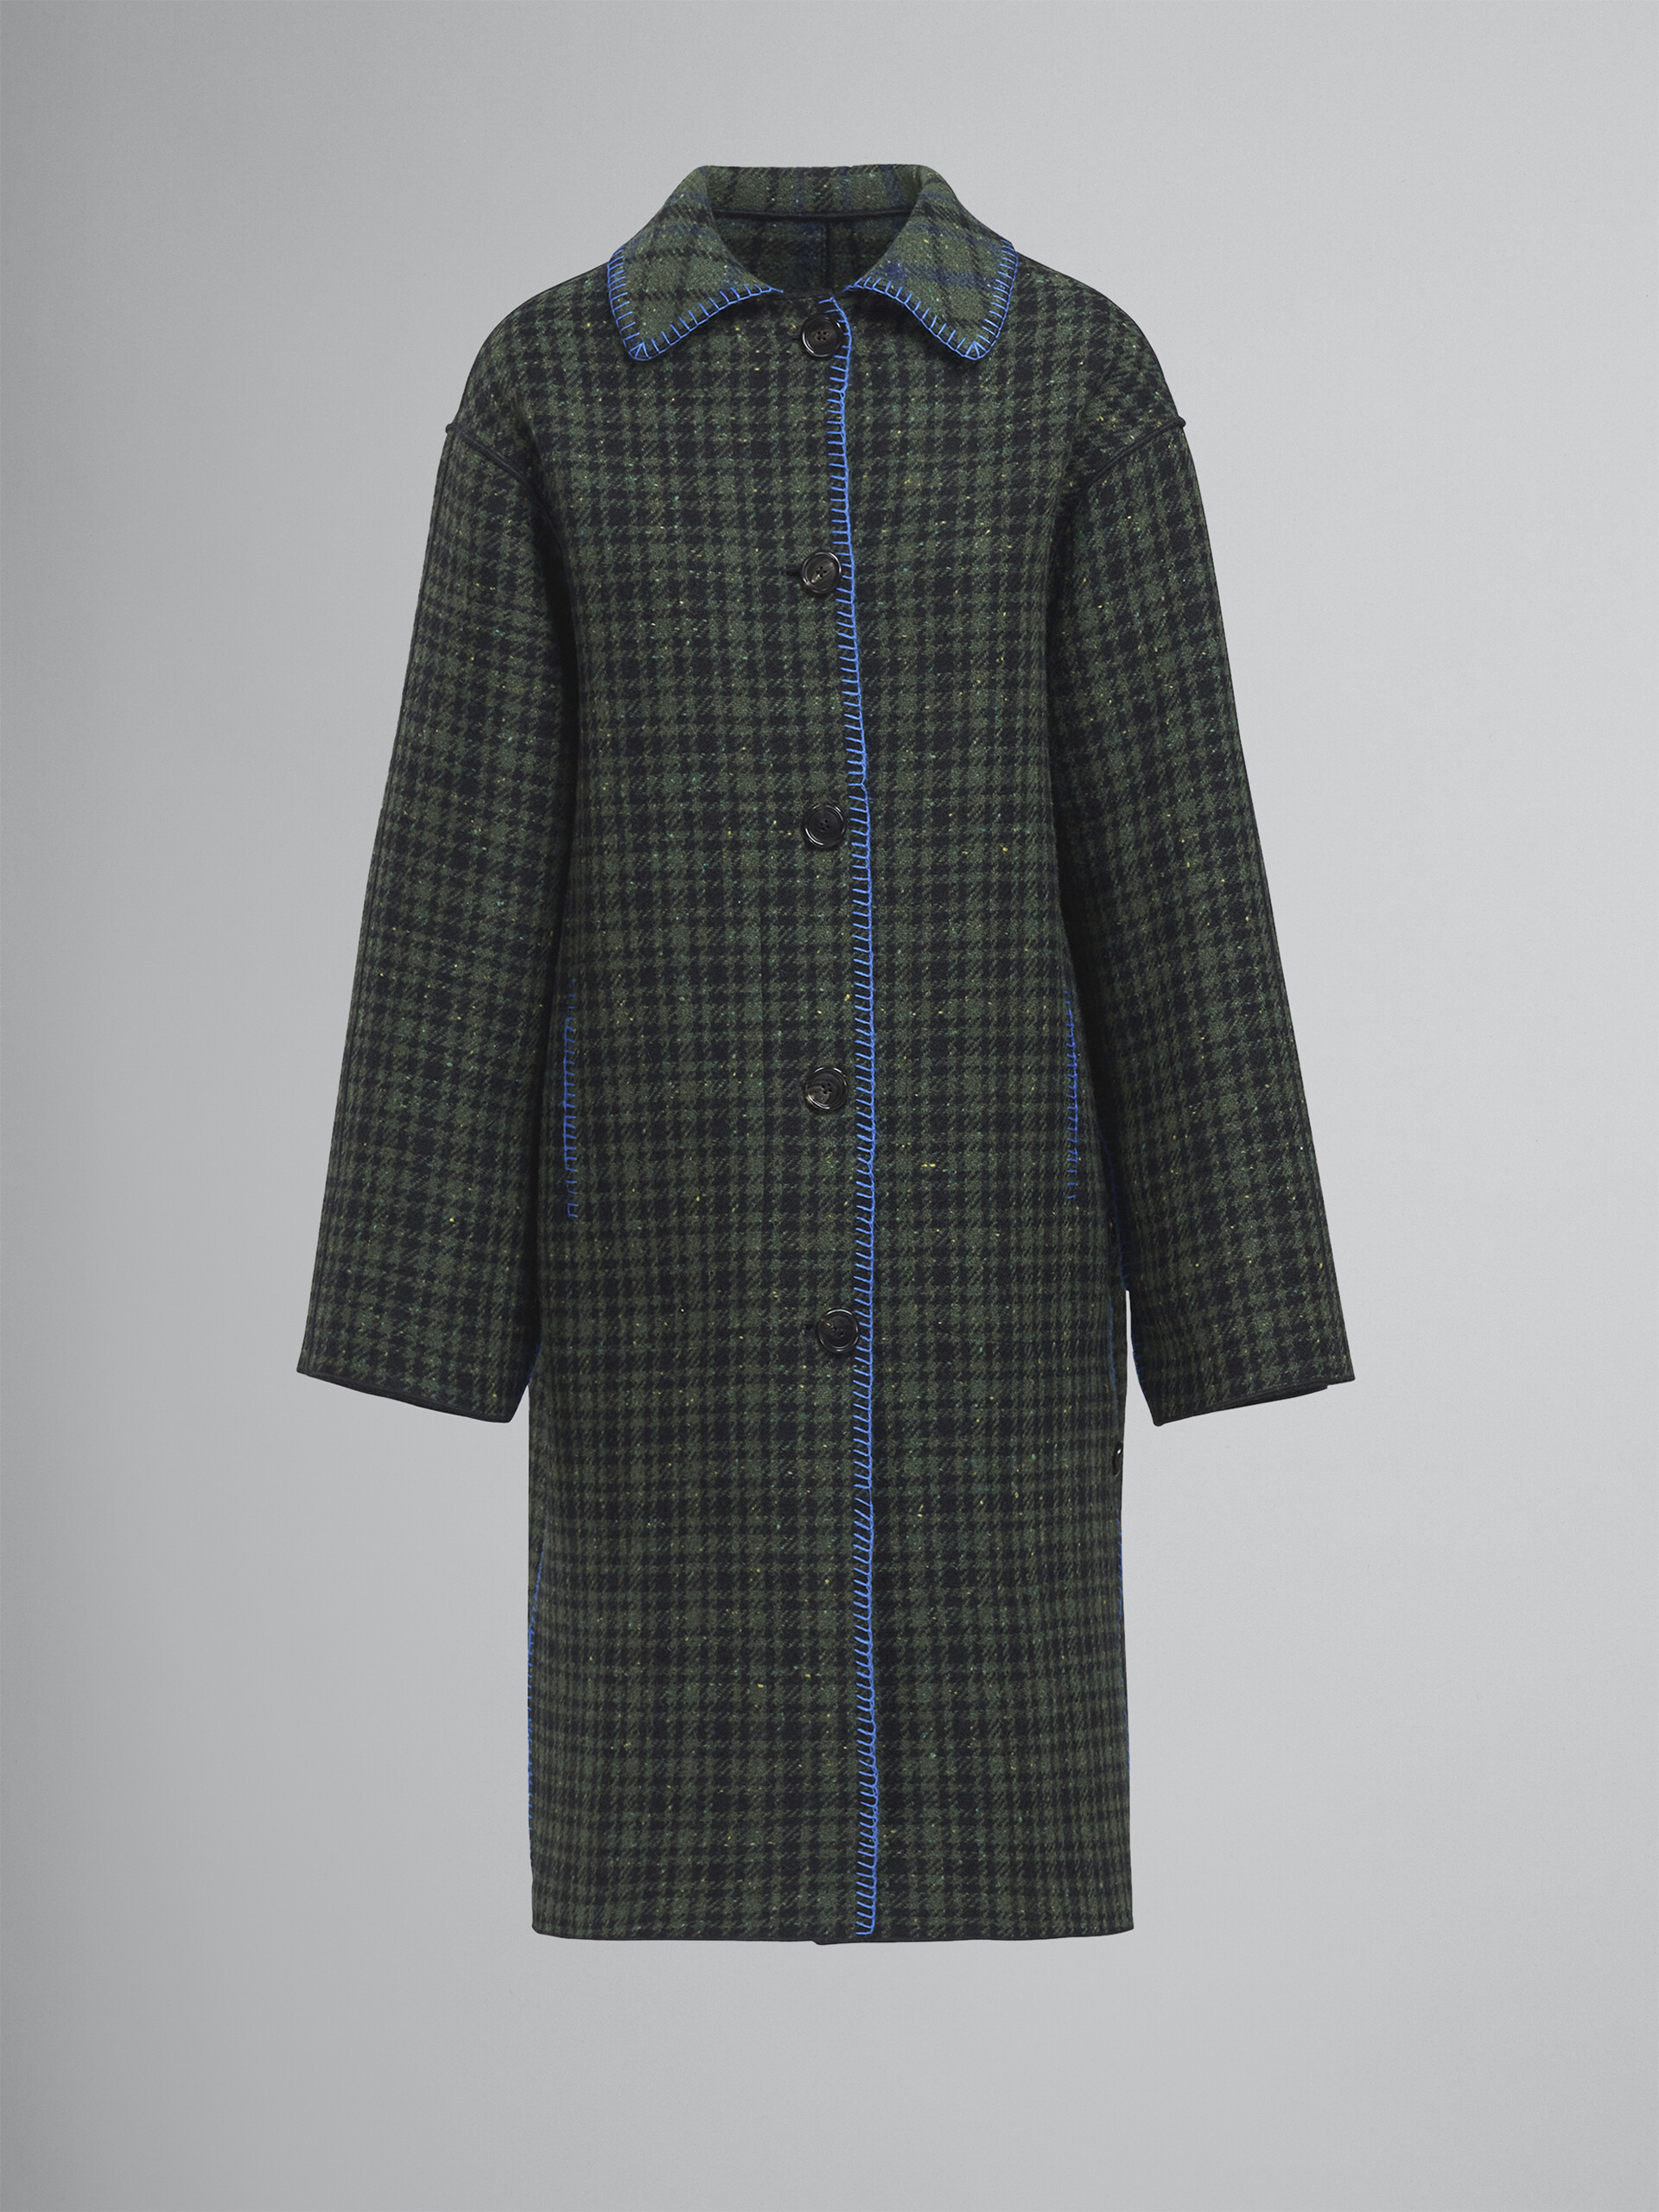 Double face check wool coat - Coat - Image 1